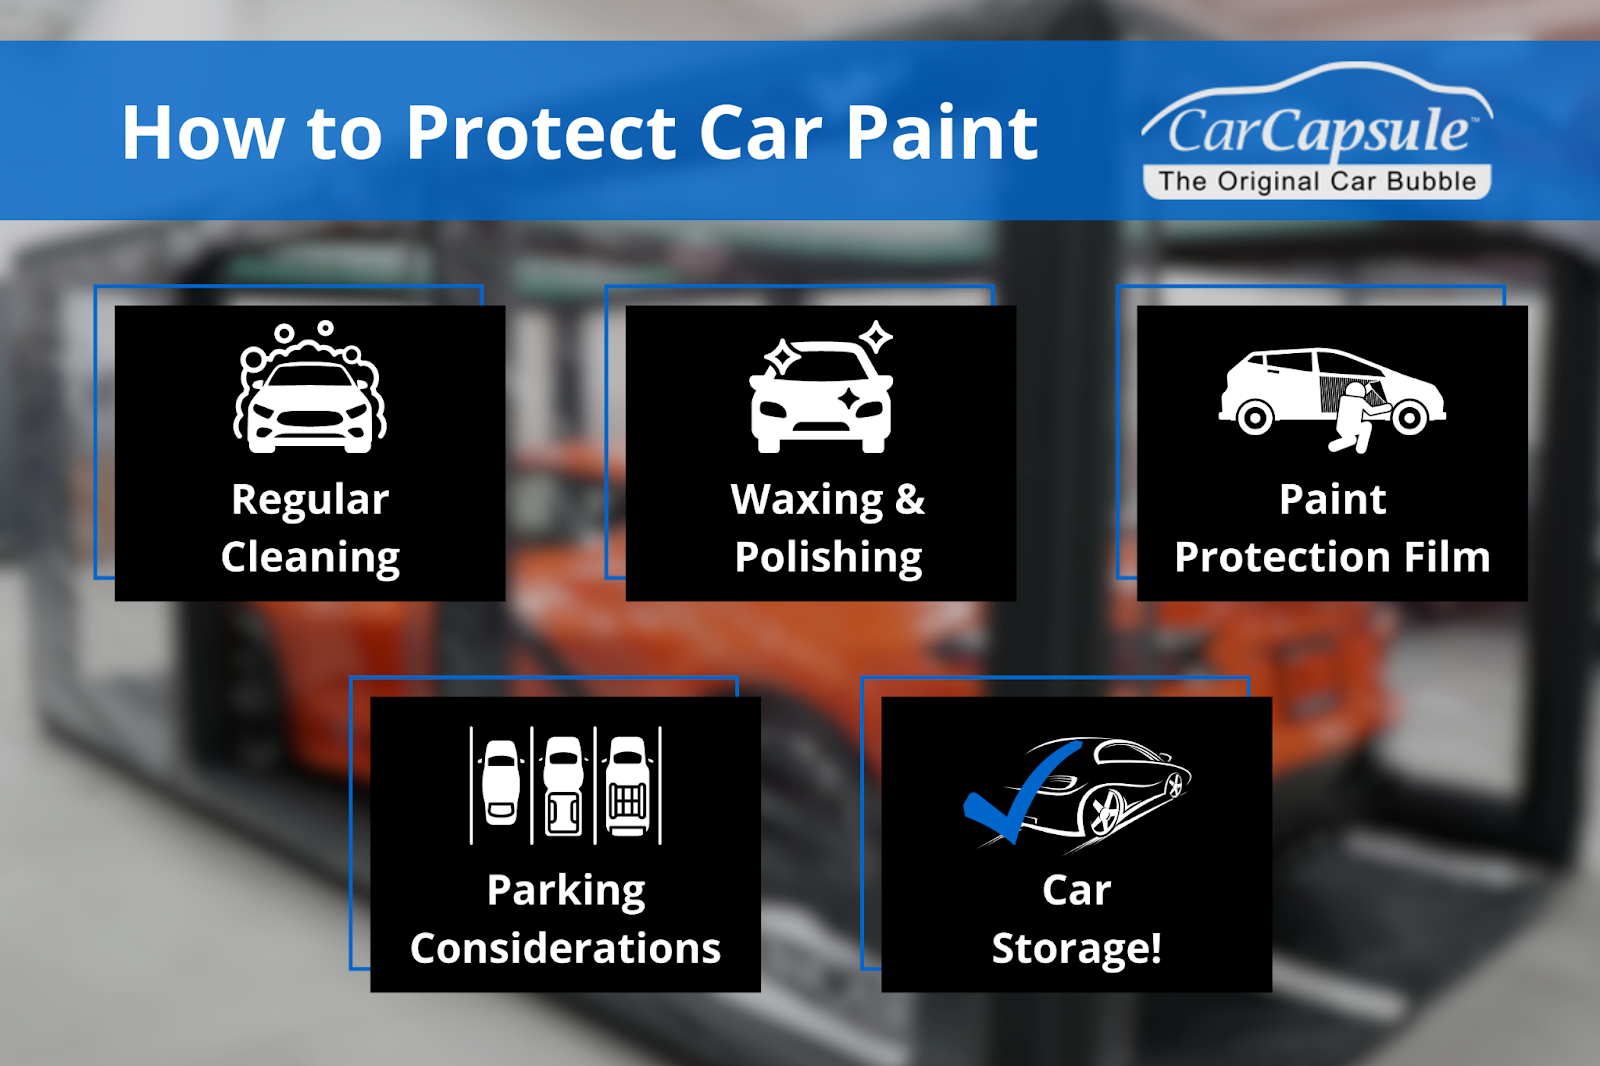 How To Protect Your Car's Paint And Make It Shine: Wax Or Polish?